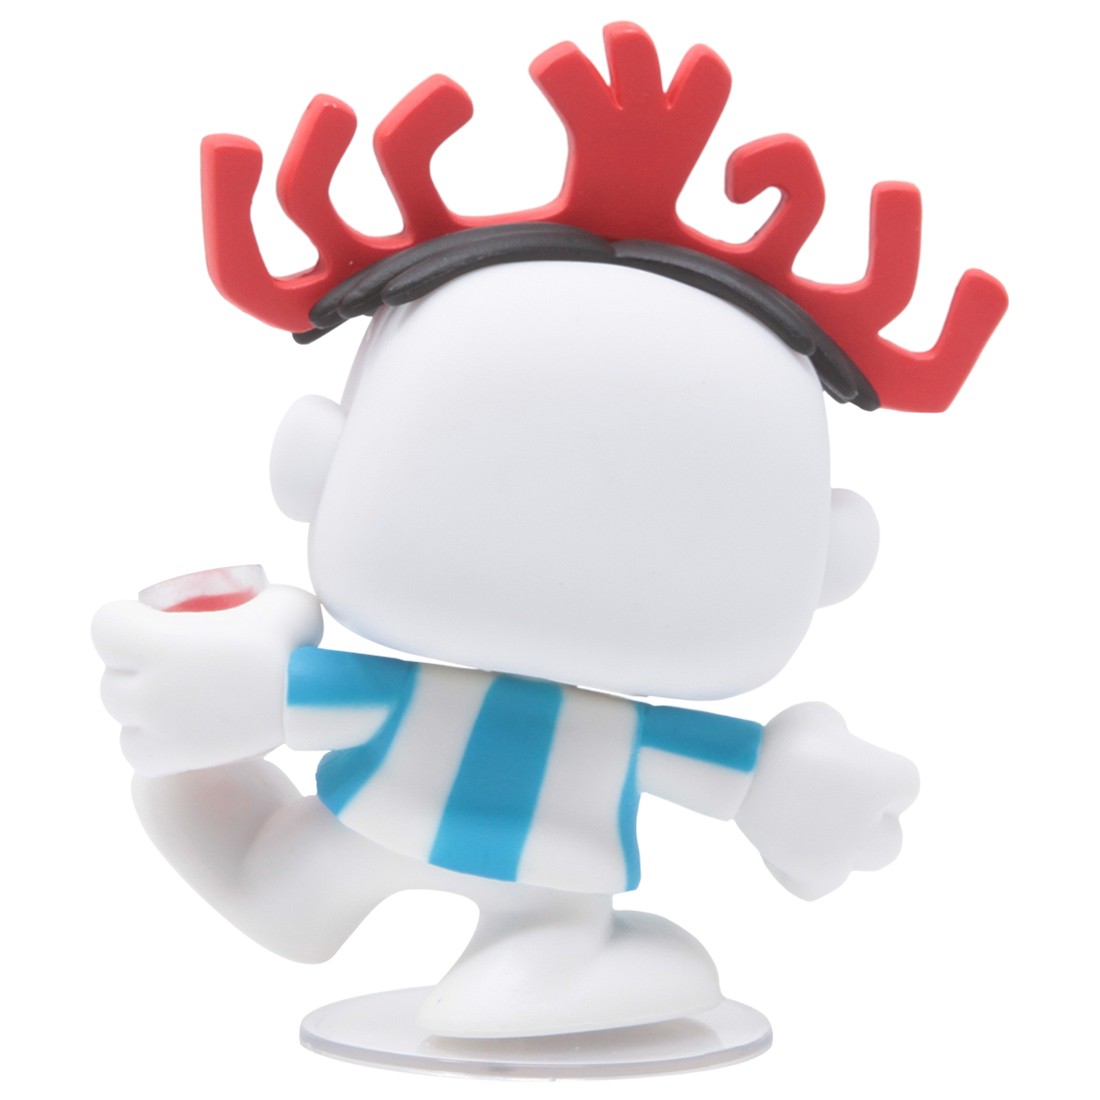 Funko Pop AD Icons Hawaiian Punch Punchy PREORDER Confirmed for sale online 